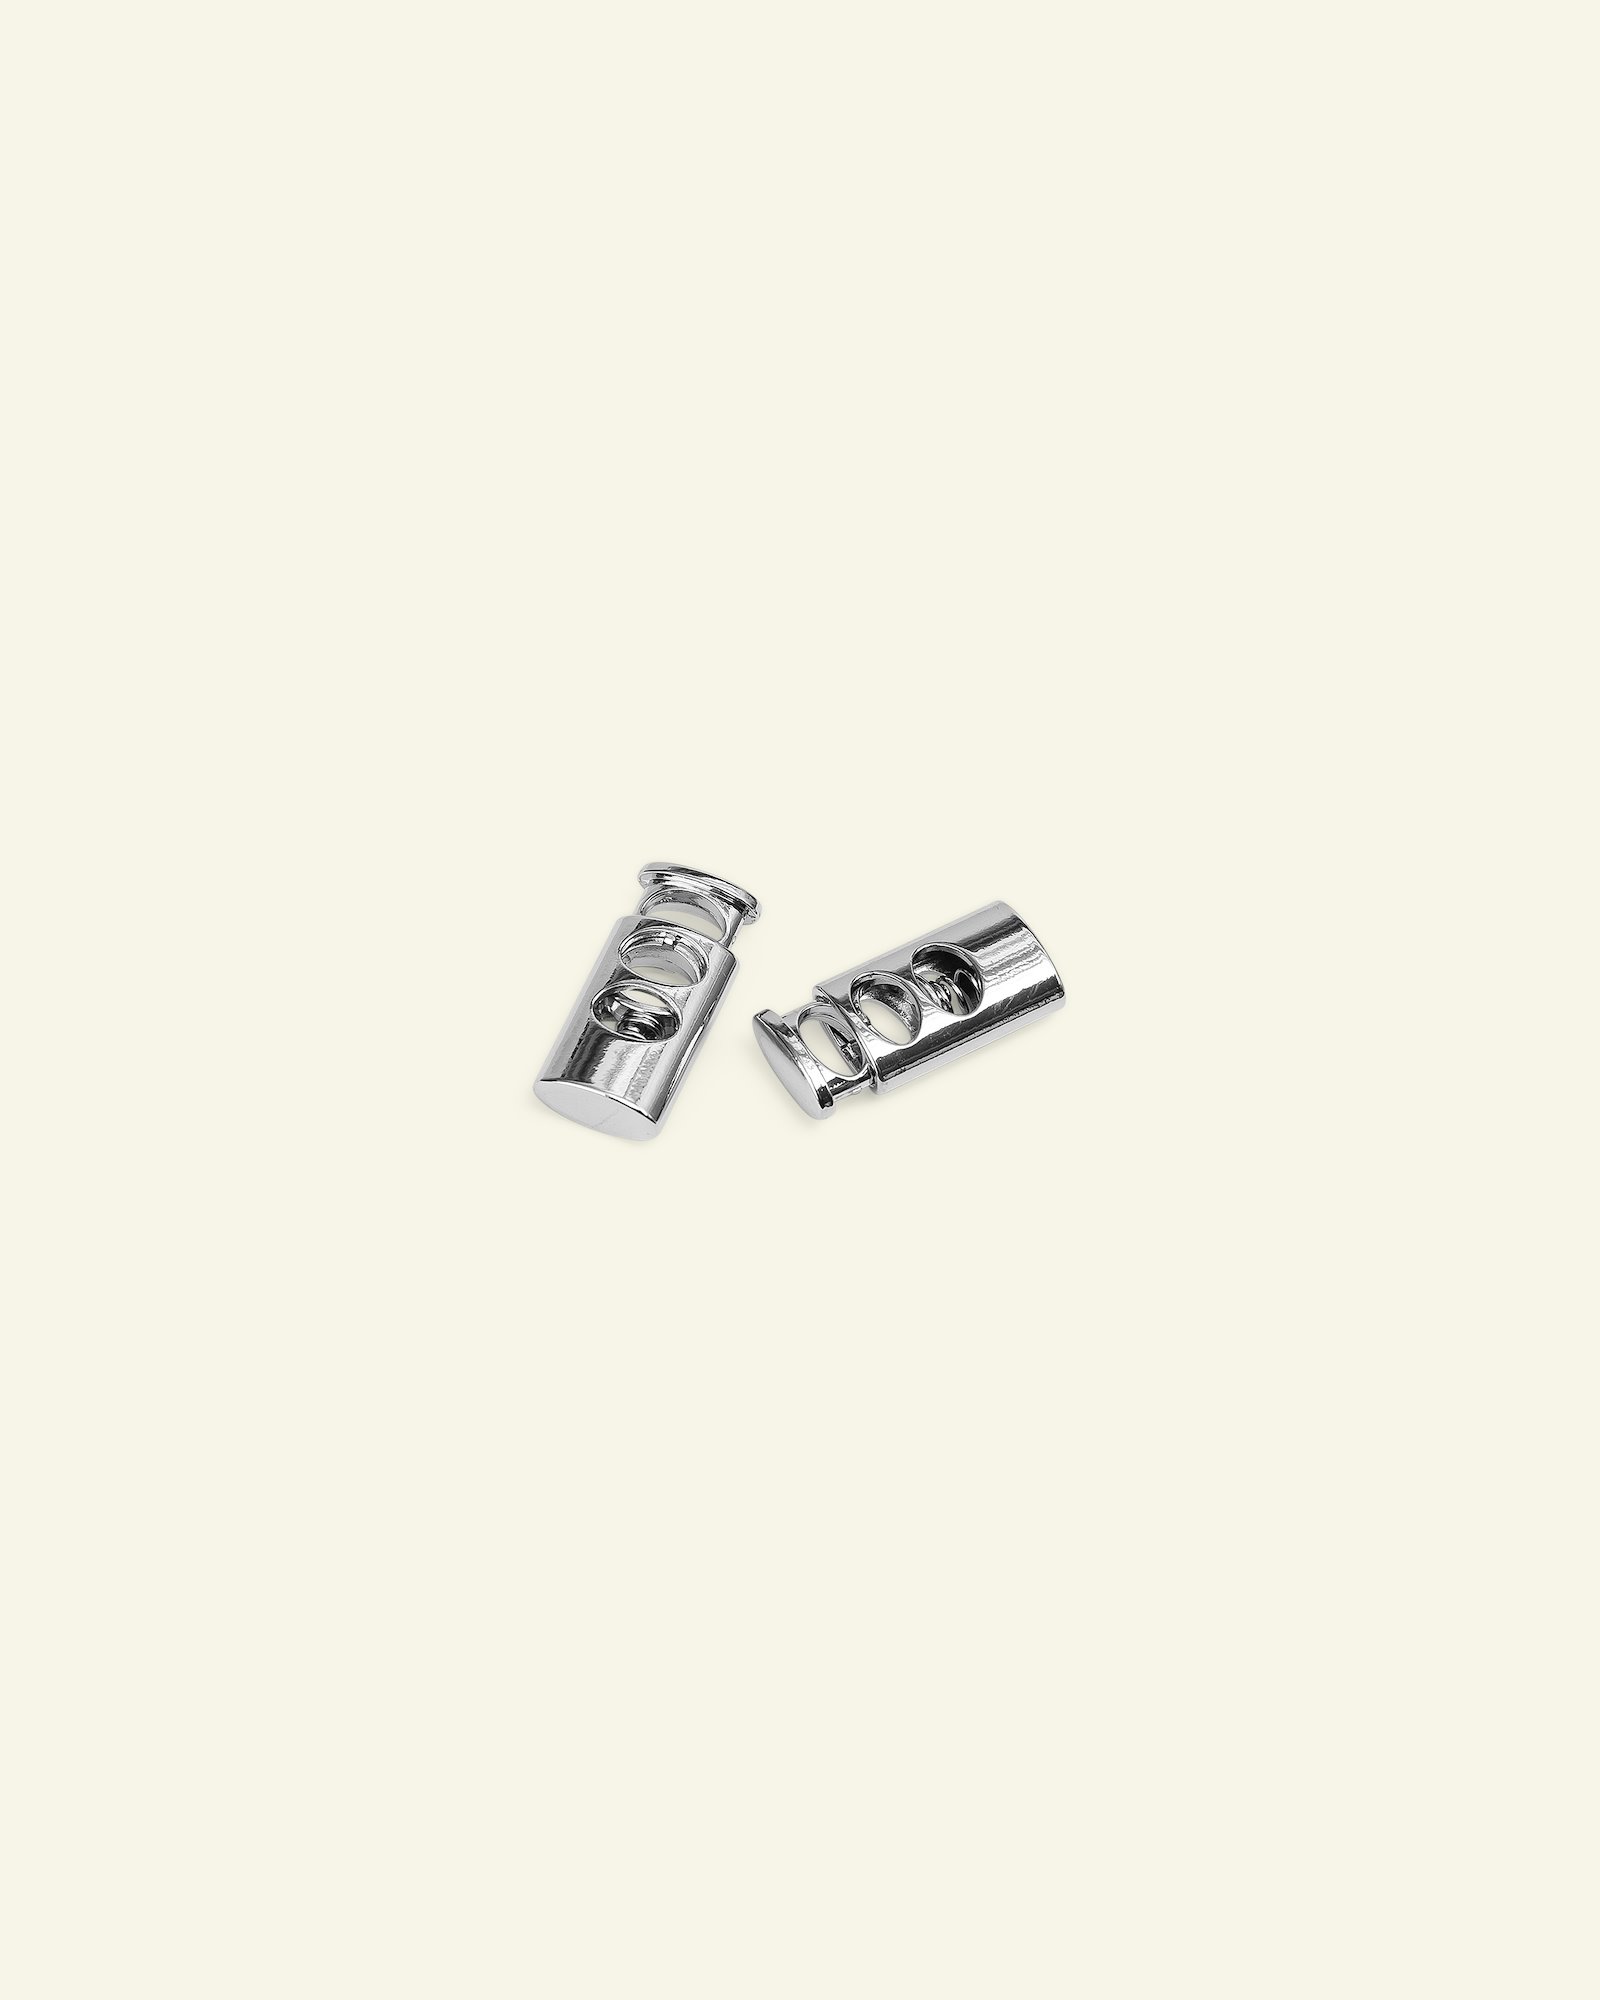 Cord lock double 28x13mm silver col. 2pc 43729_pack